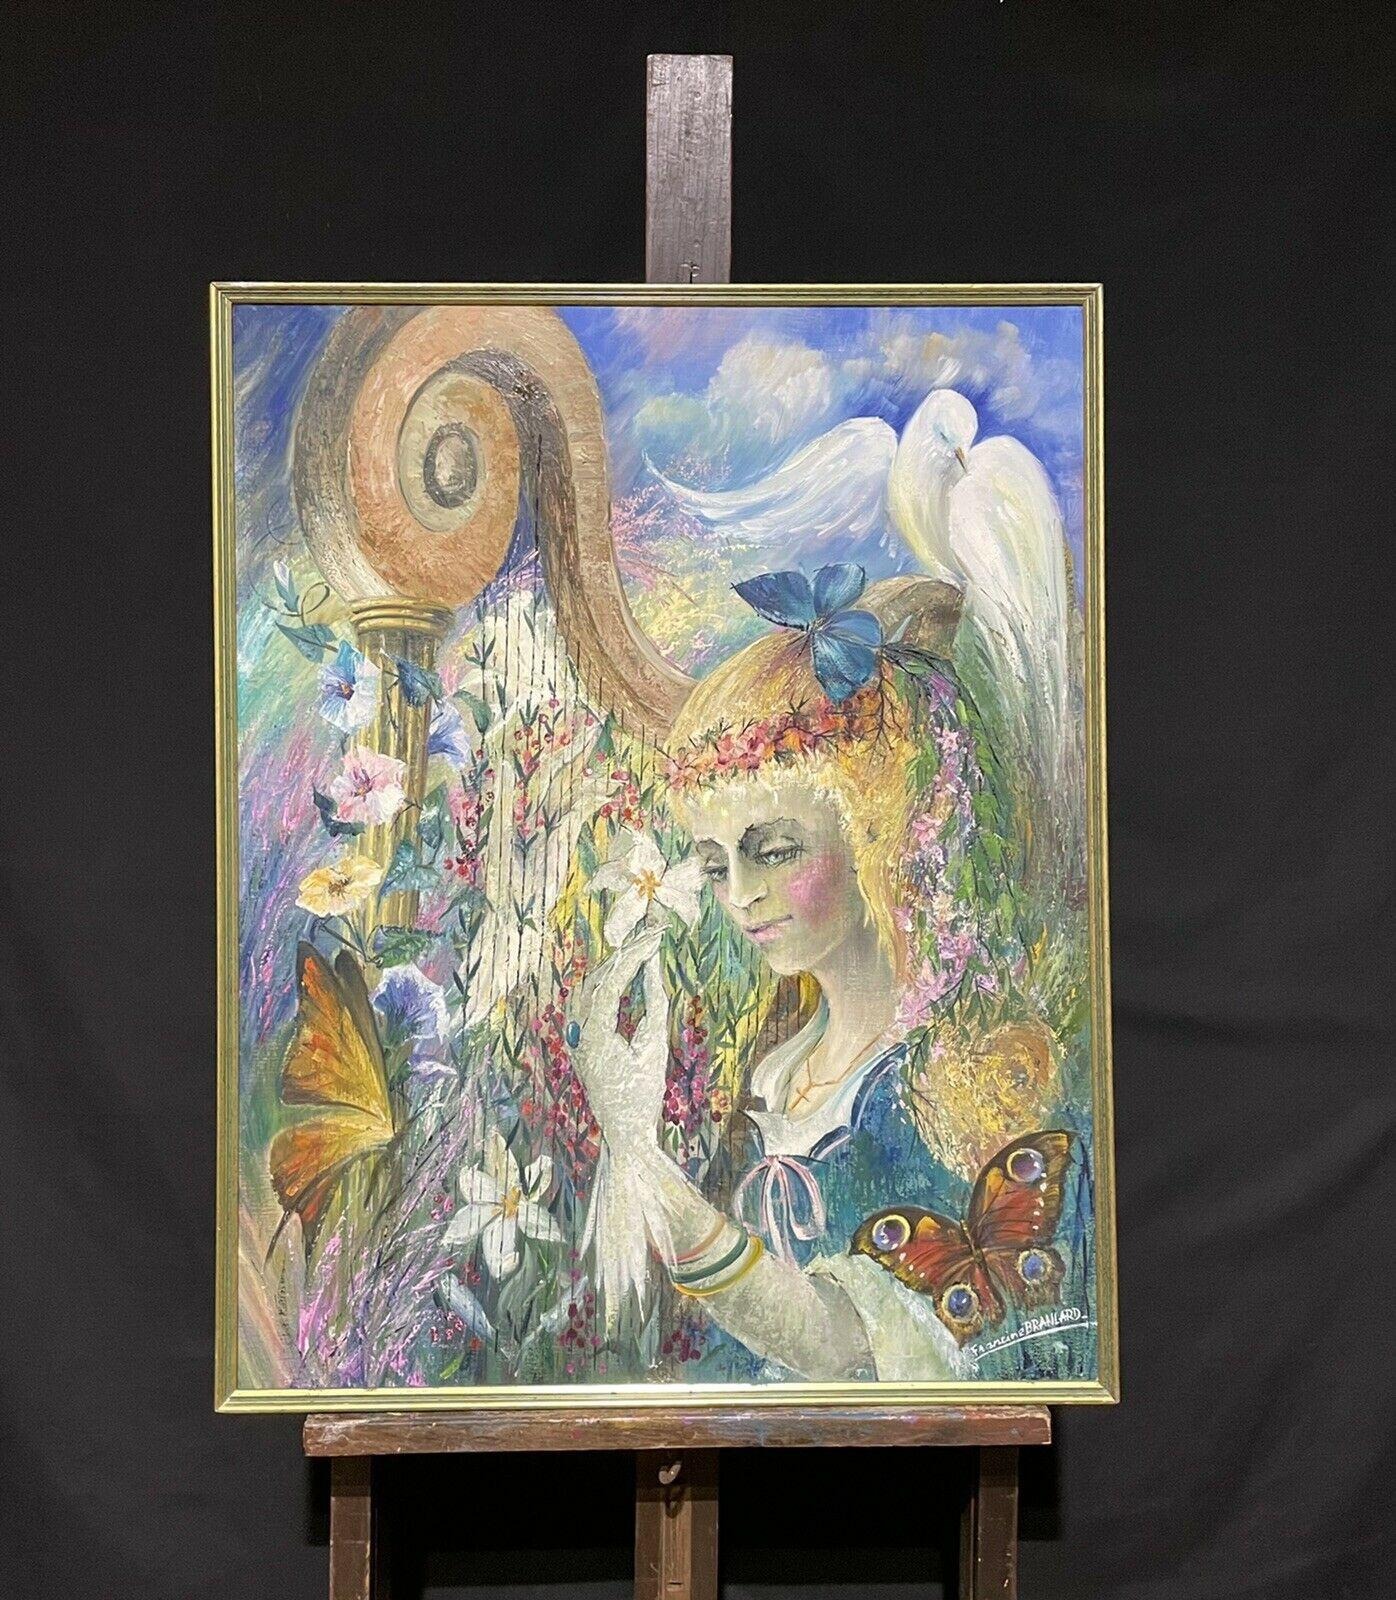 Artist/ School: Francine Braniard (French contemporary), signed

Title: titled verso

Medium:  oil painting on canvas, framed

Size: framed 37 x 29.5 inches.
        
Provenance: all the paintings we have for sale by this artist have come from a